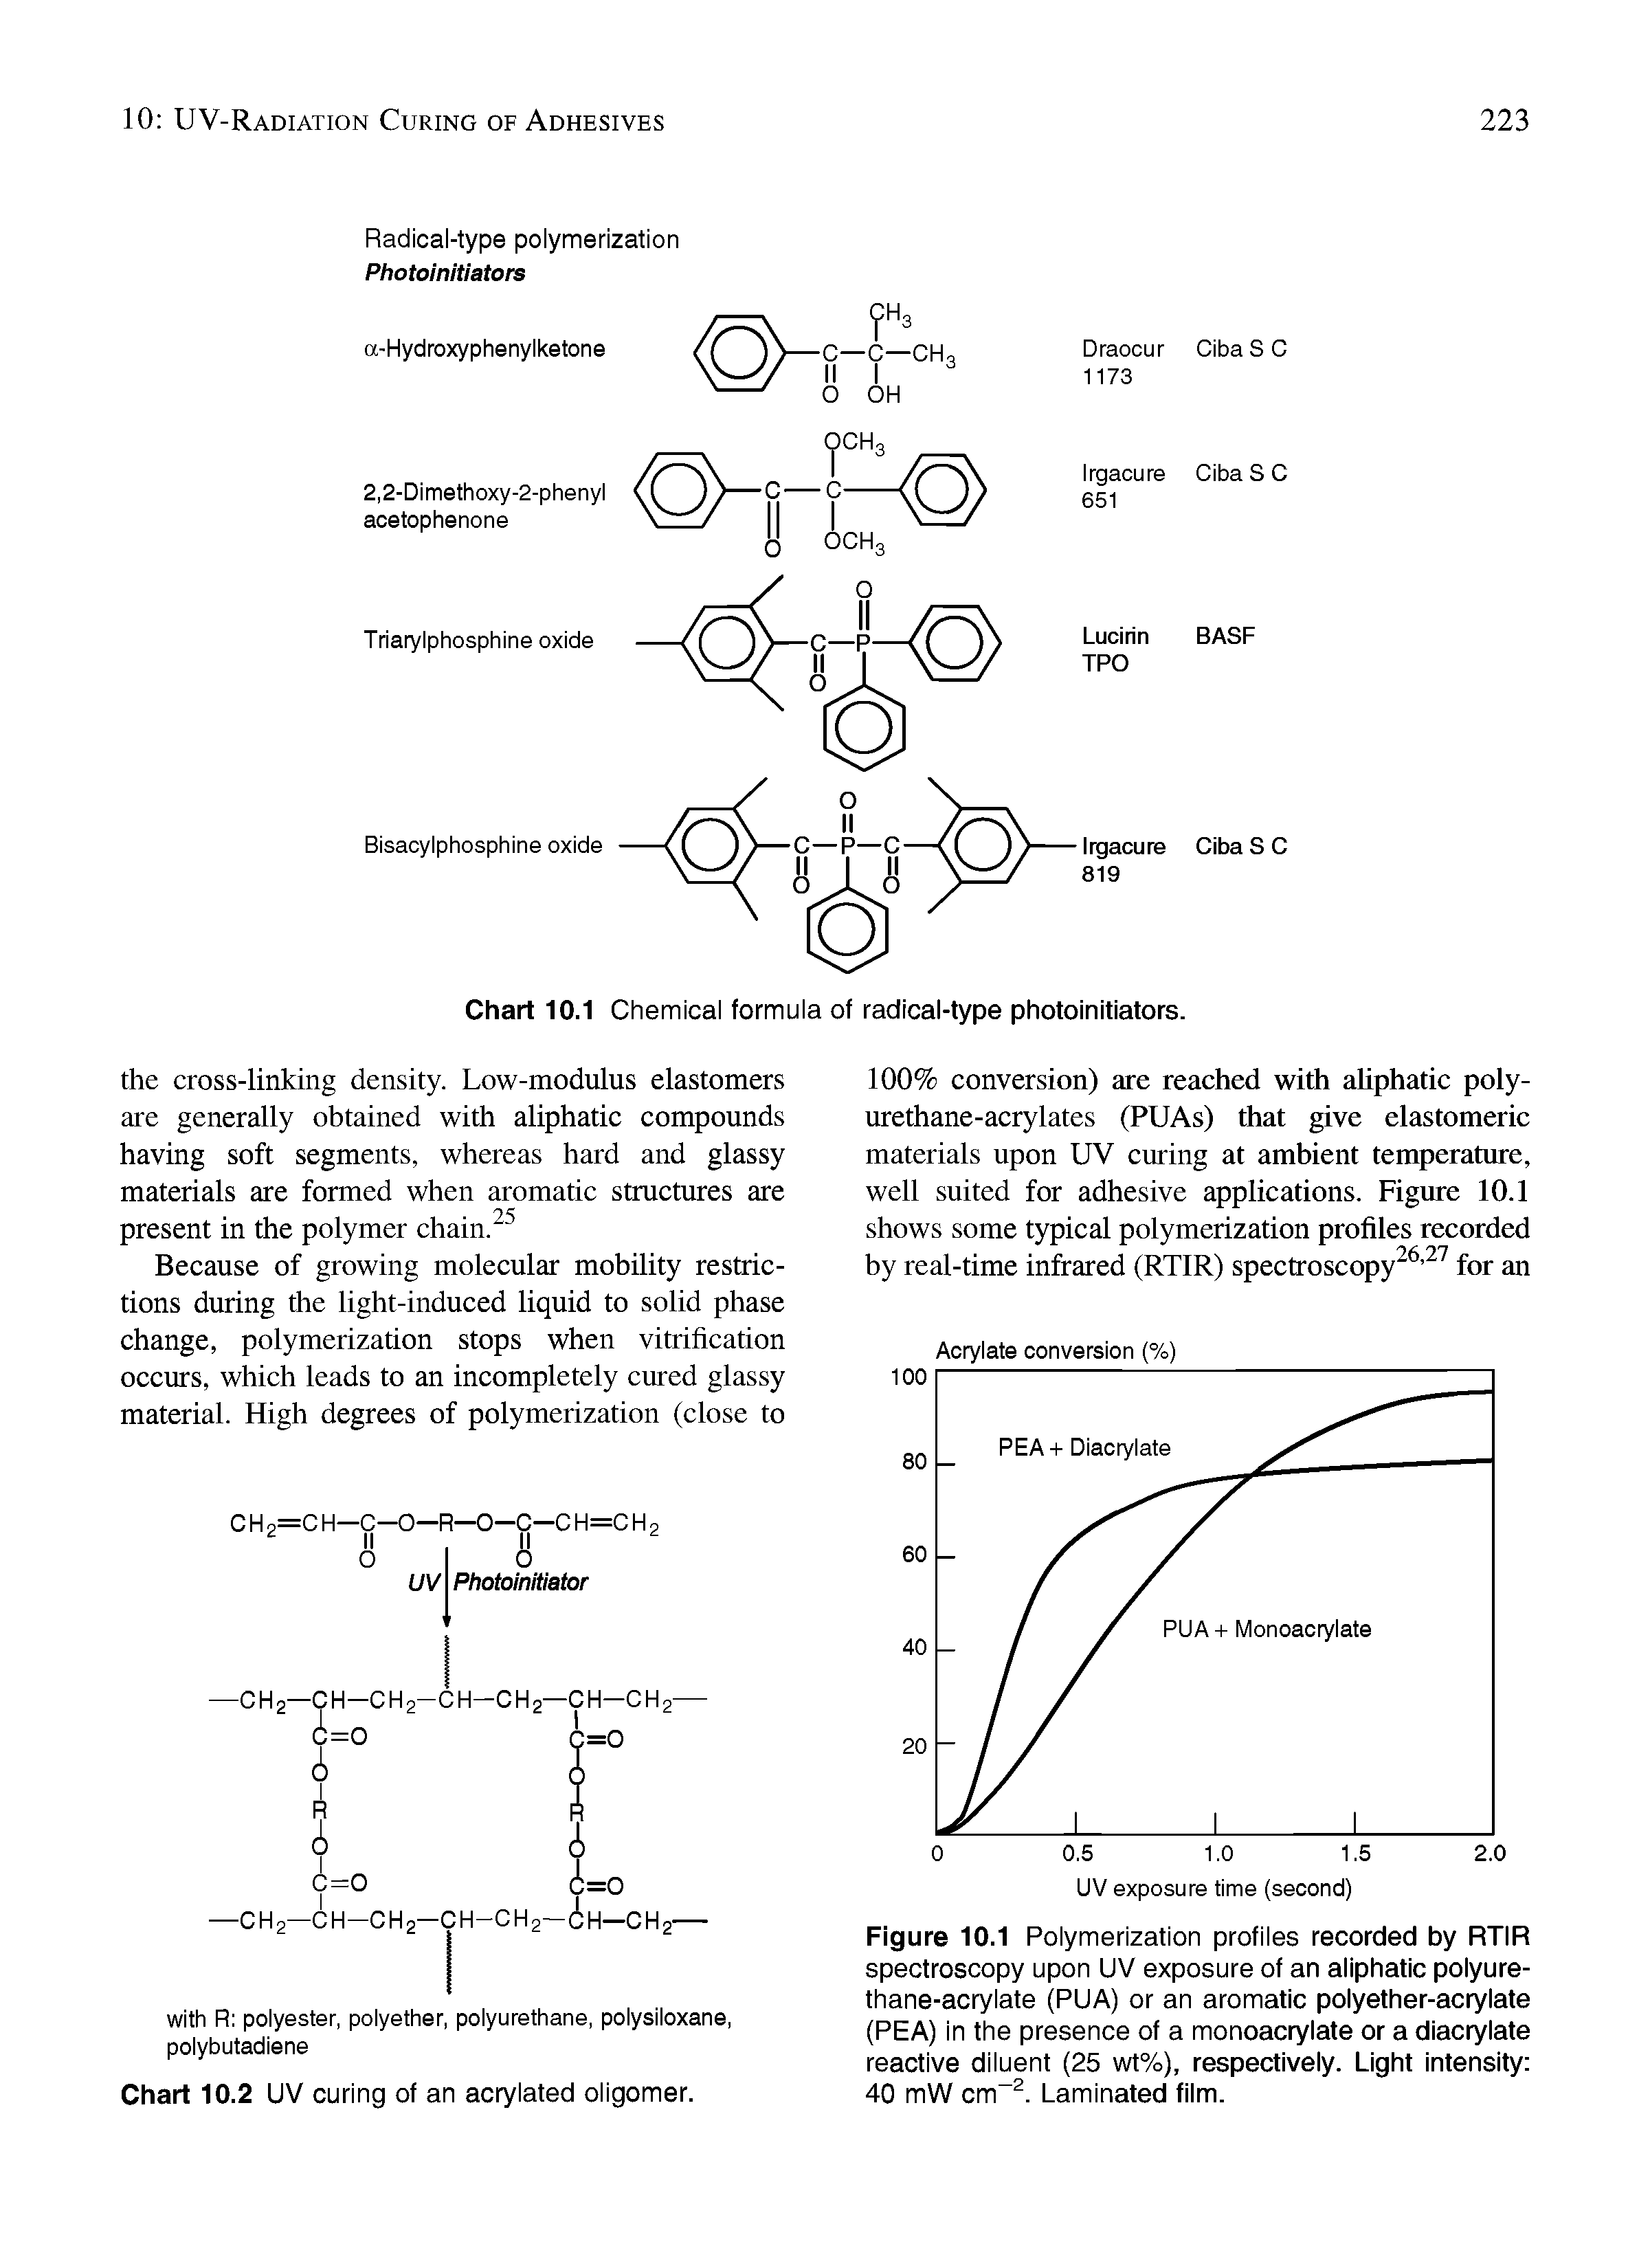 Figure 10.1 Polymerization profiles recorded by RTIR spectroscopy upon UV exposure of an aliphatic polyurethane-acrylate (PUA) or an aromatic polyether-acrylate (PEA) in the presence of a monoacrylate or a diacrylate reactive diluent (25 wt%), respectively. Light intensity 40 mW cm . Laminated film.